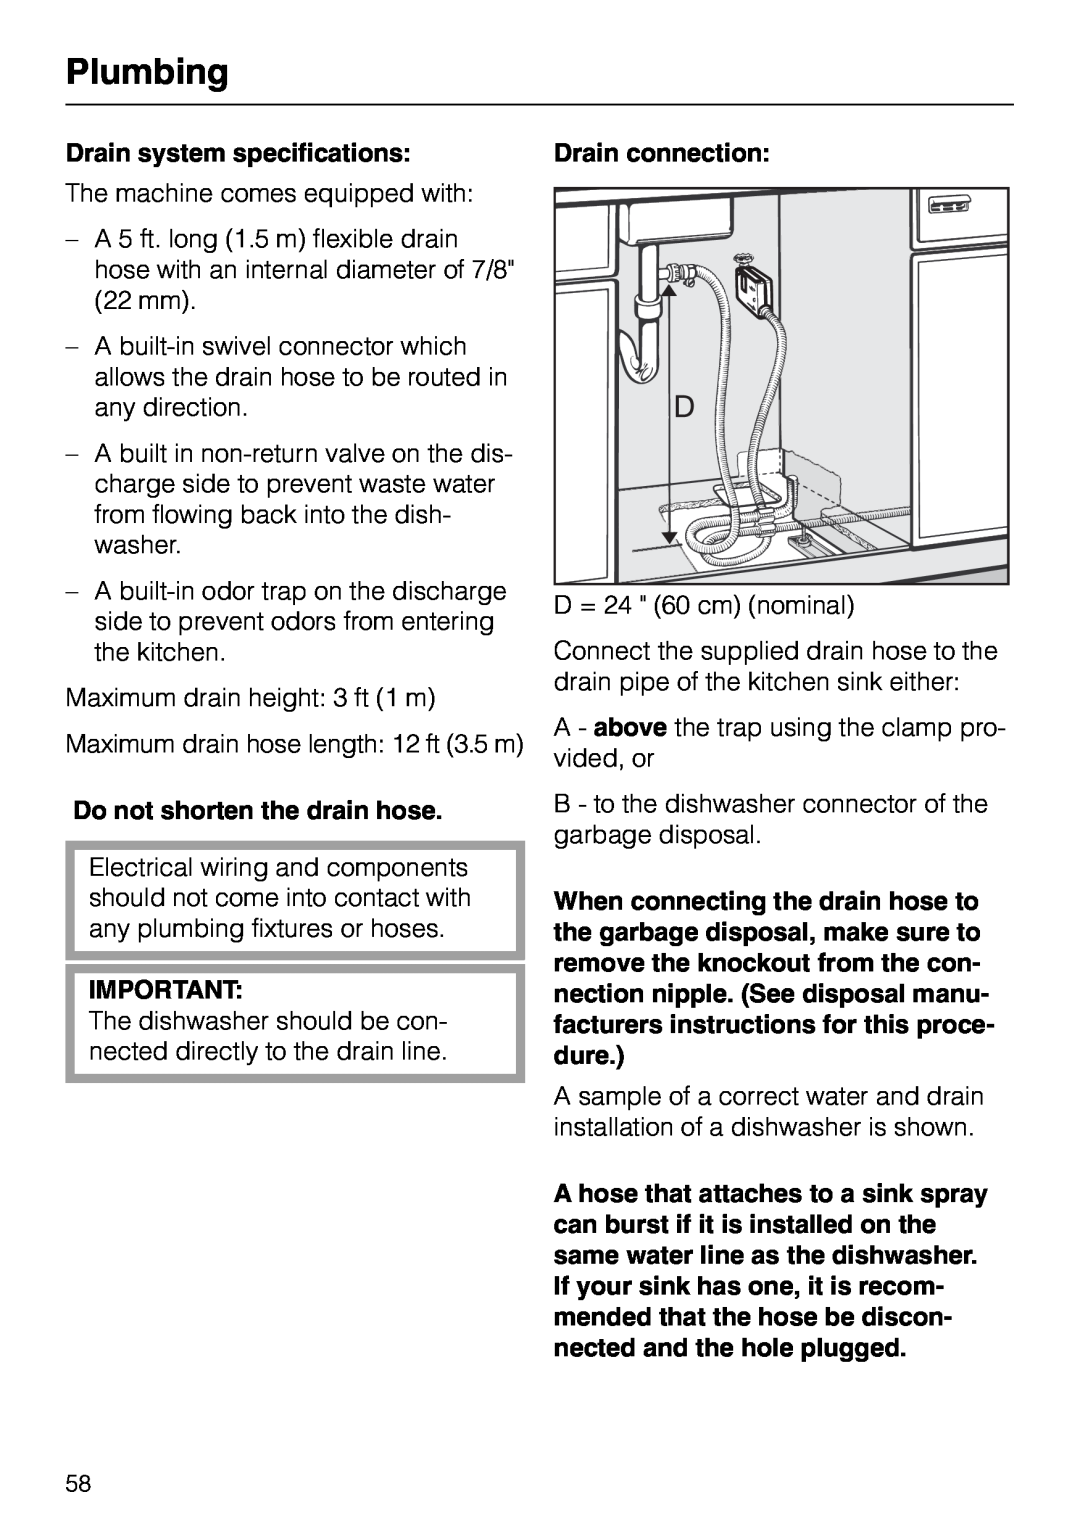 Miele M.-NR. 04 390 922 Plumbing, Drain system specifications, Do not shorten the drain hose, Drain connection 